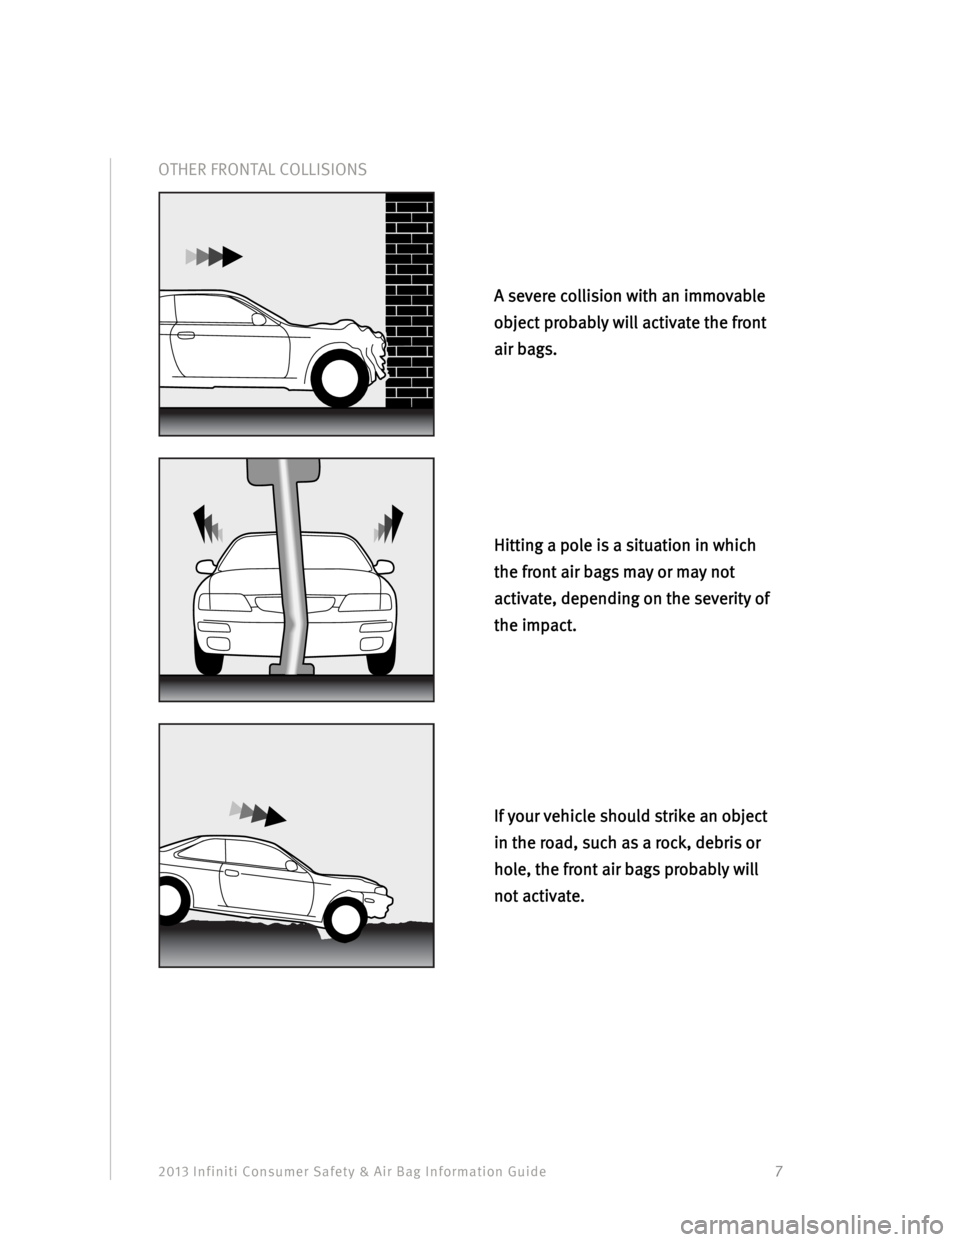 INFINITI G CONVERTIBLE 2013  Consumer Safety And Air Bag Information Guide 2013 Infiniti Consumer Safety & Air Bag Information Guide                                         7 
OTHER FRONTAL COLLISIONS  
 
 
 
 
 
If your vehicle should strike an object 
in the road, such as 